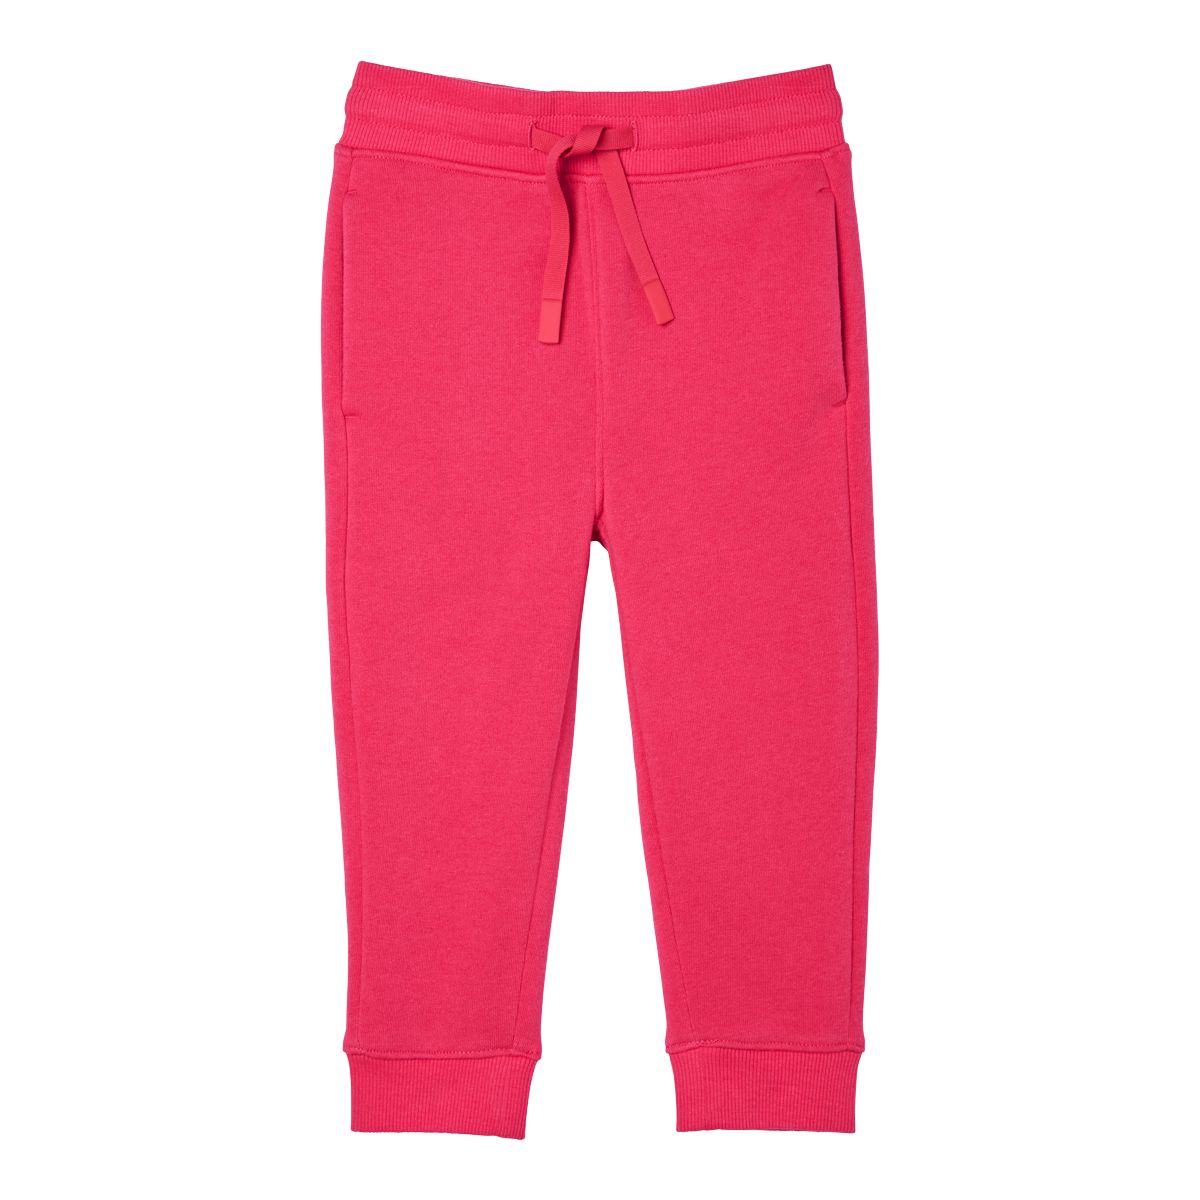 jogger pants for kids (Small, medium,large available)